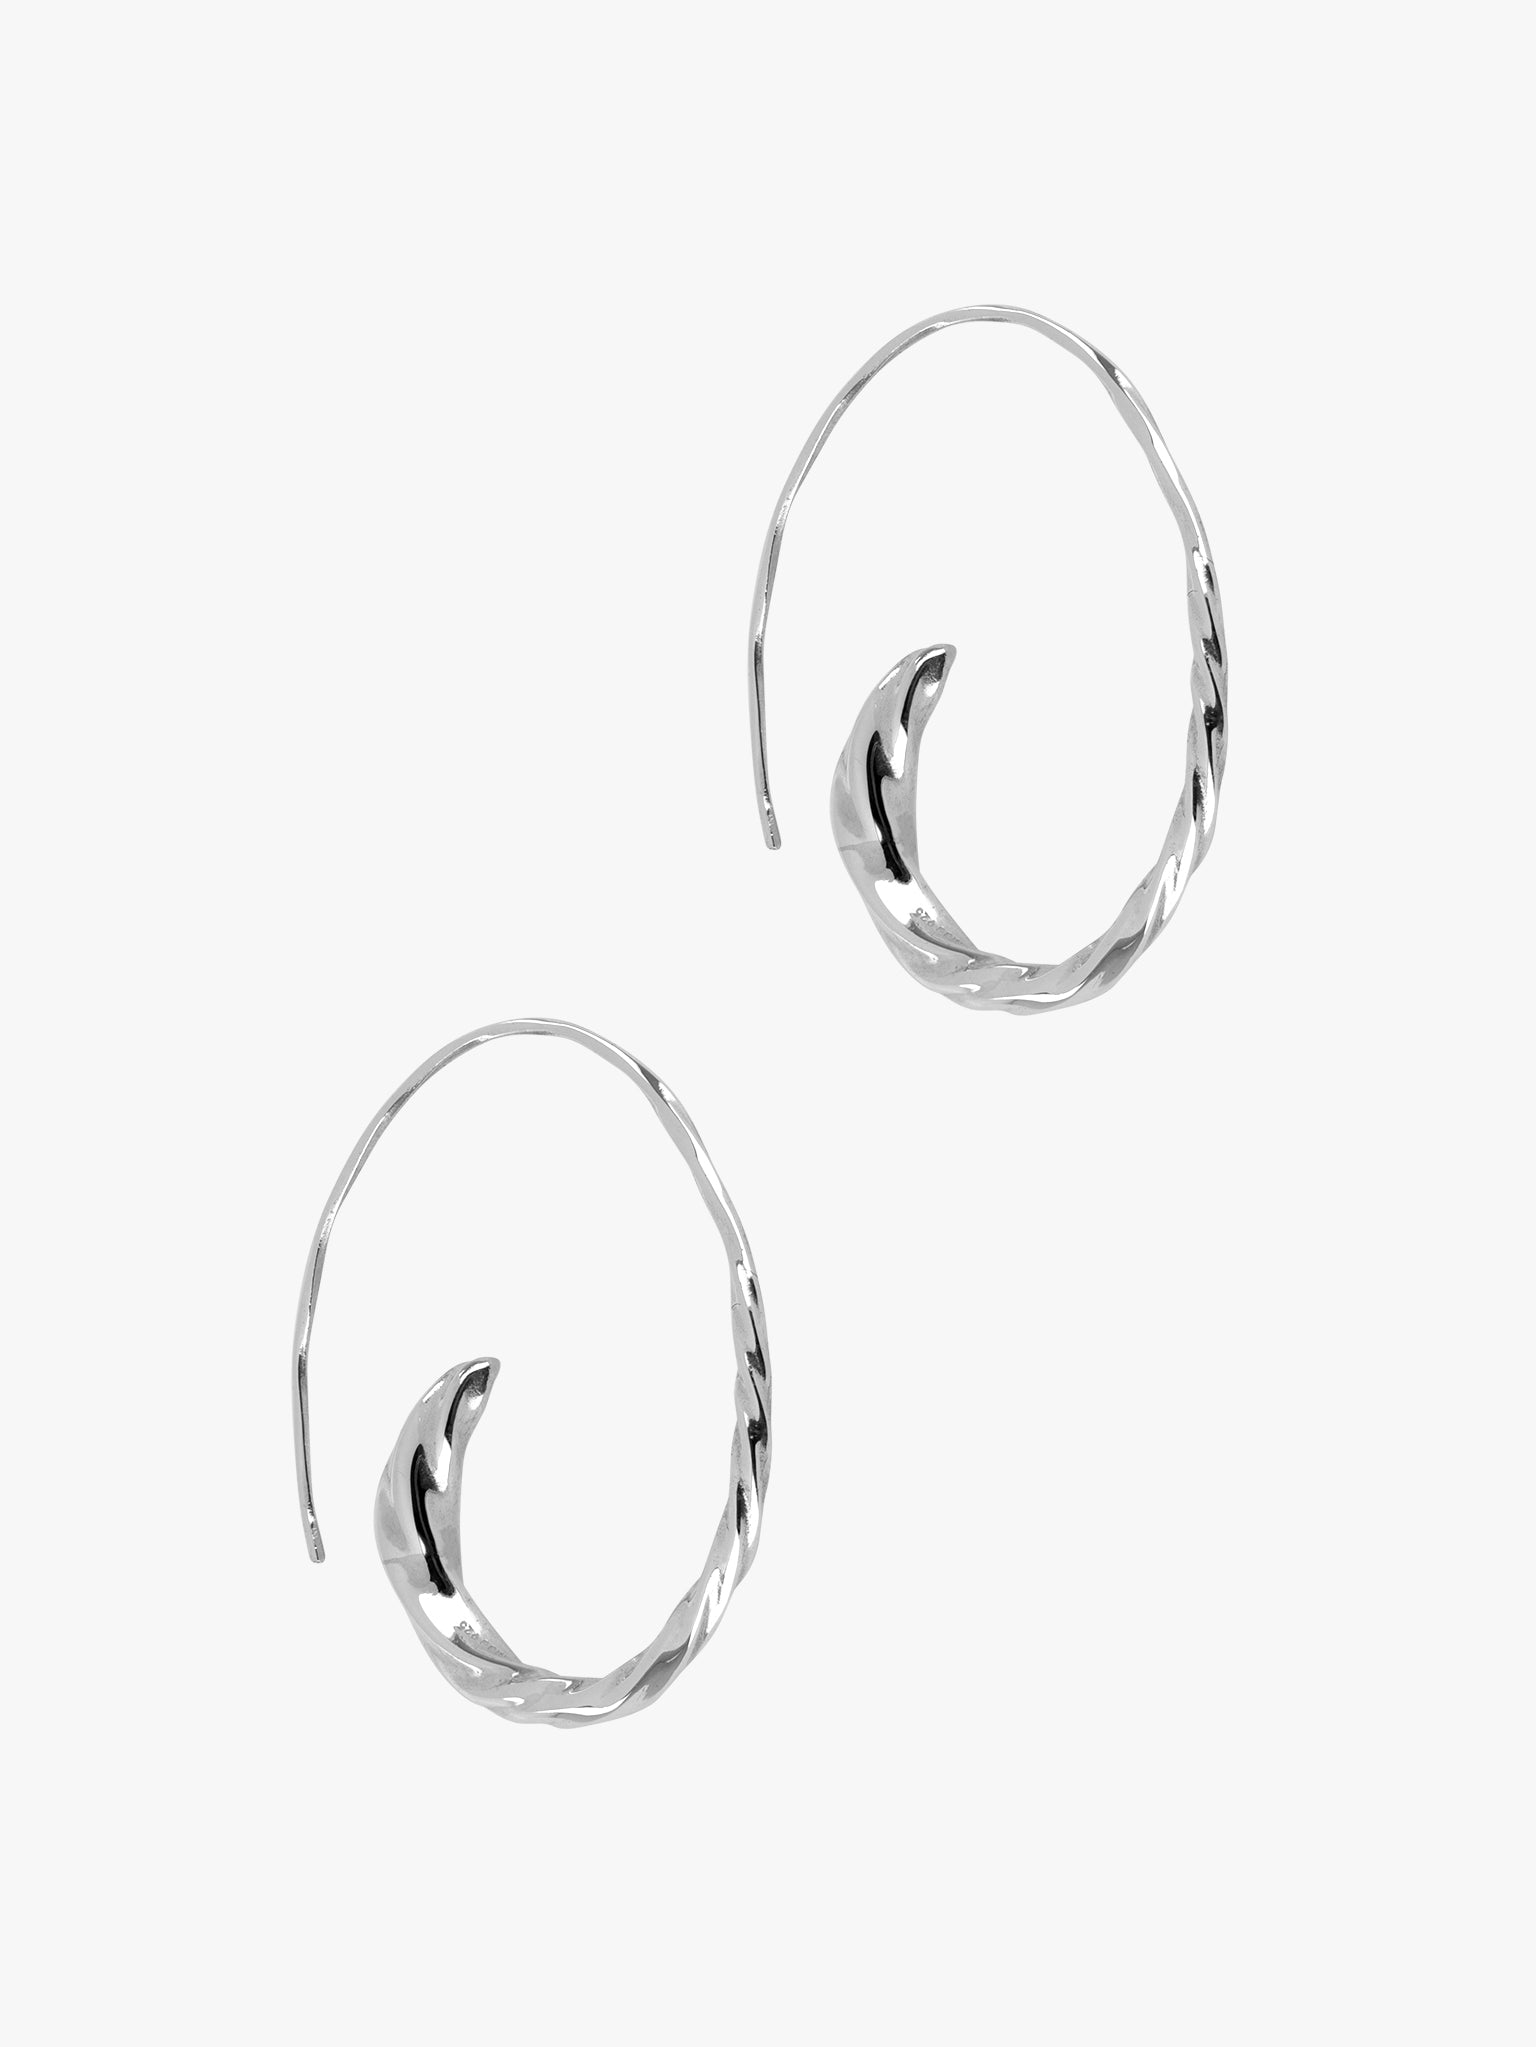 Large flow polished asymmetric hoops